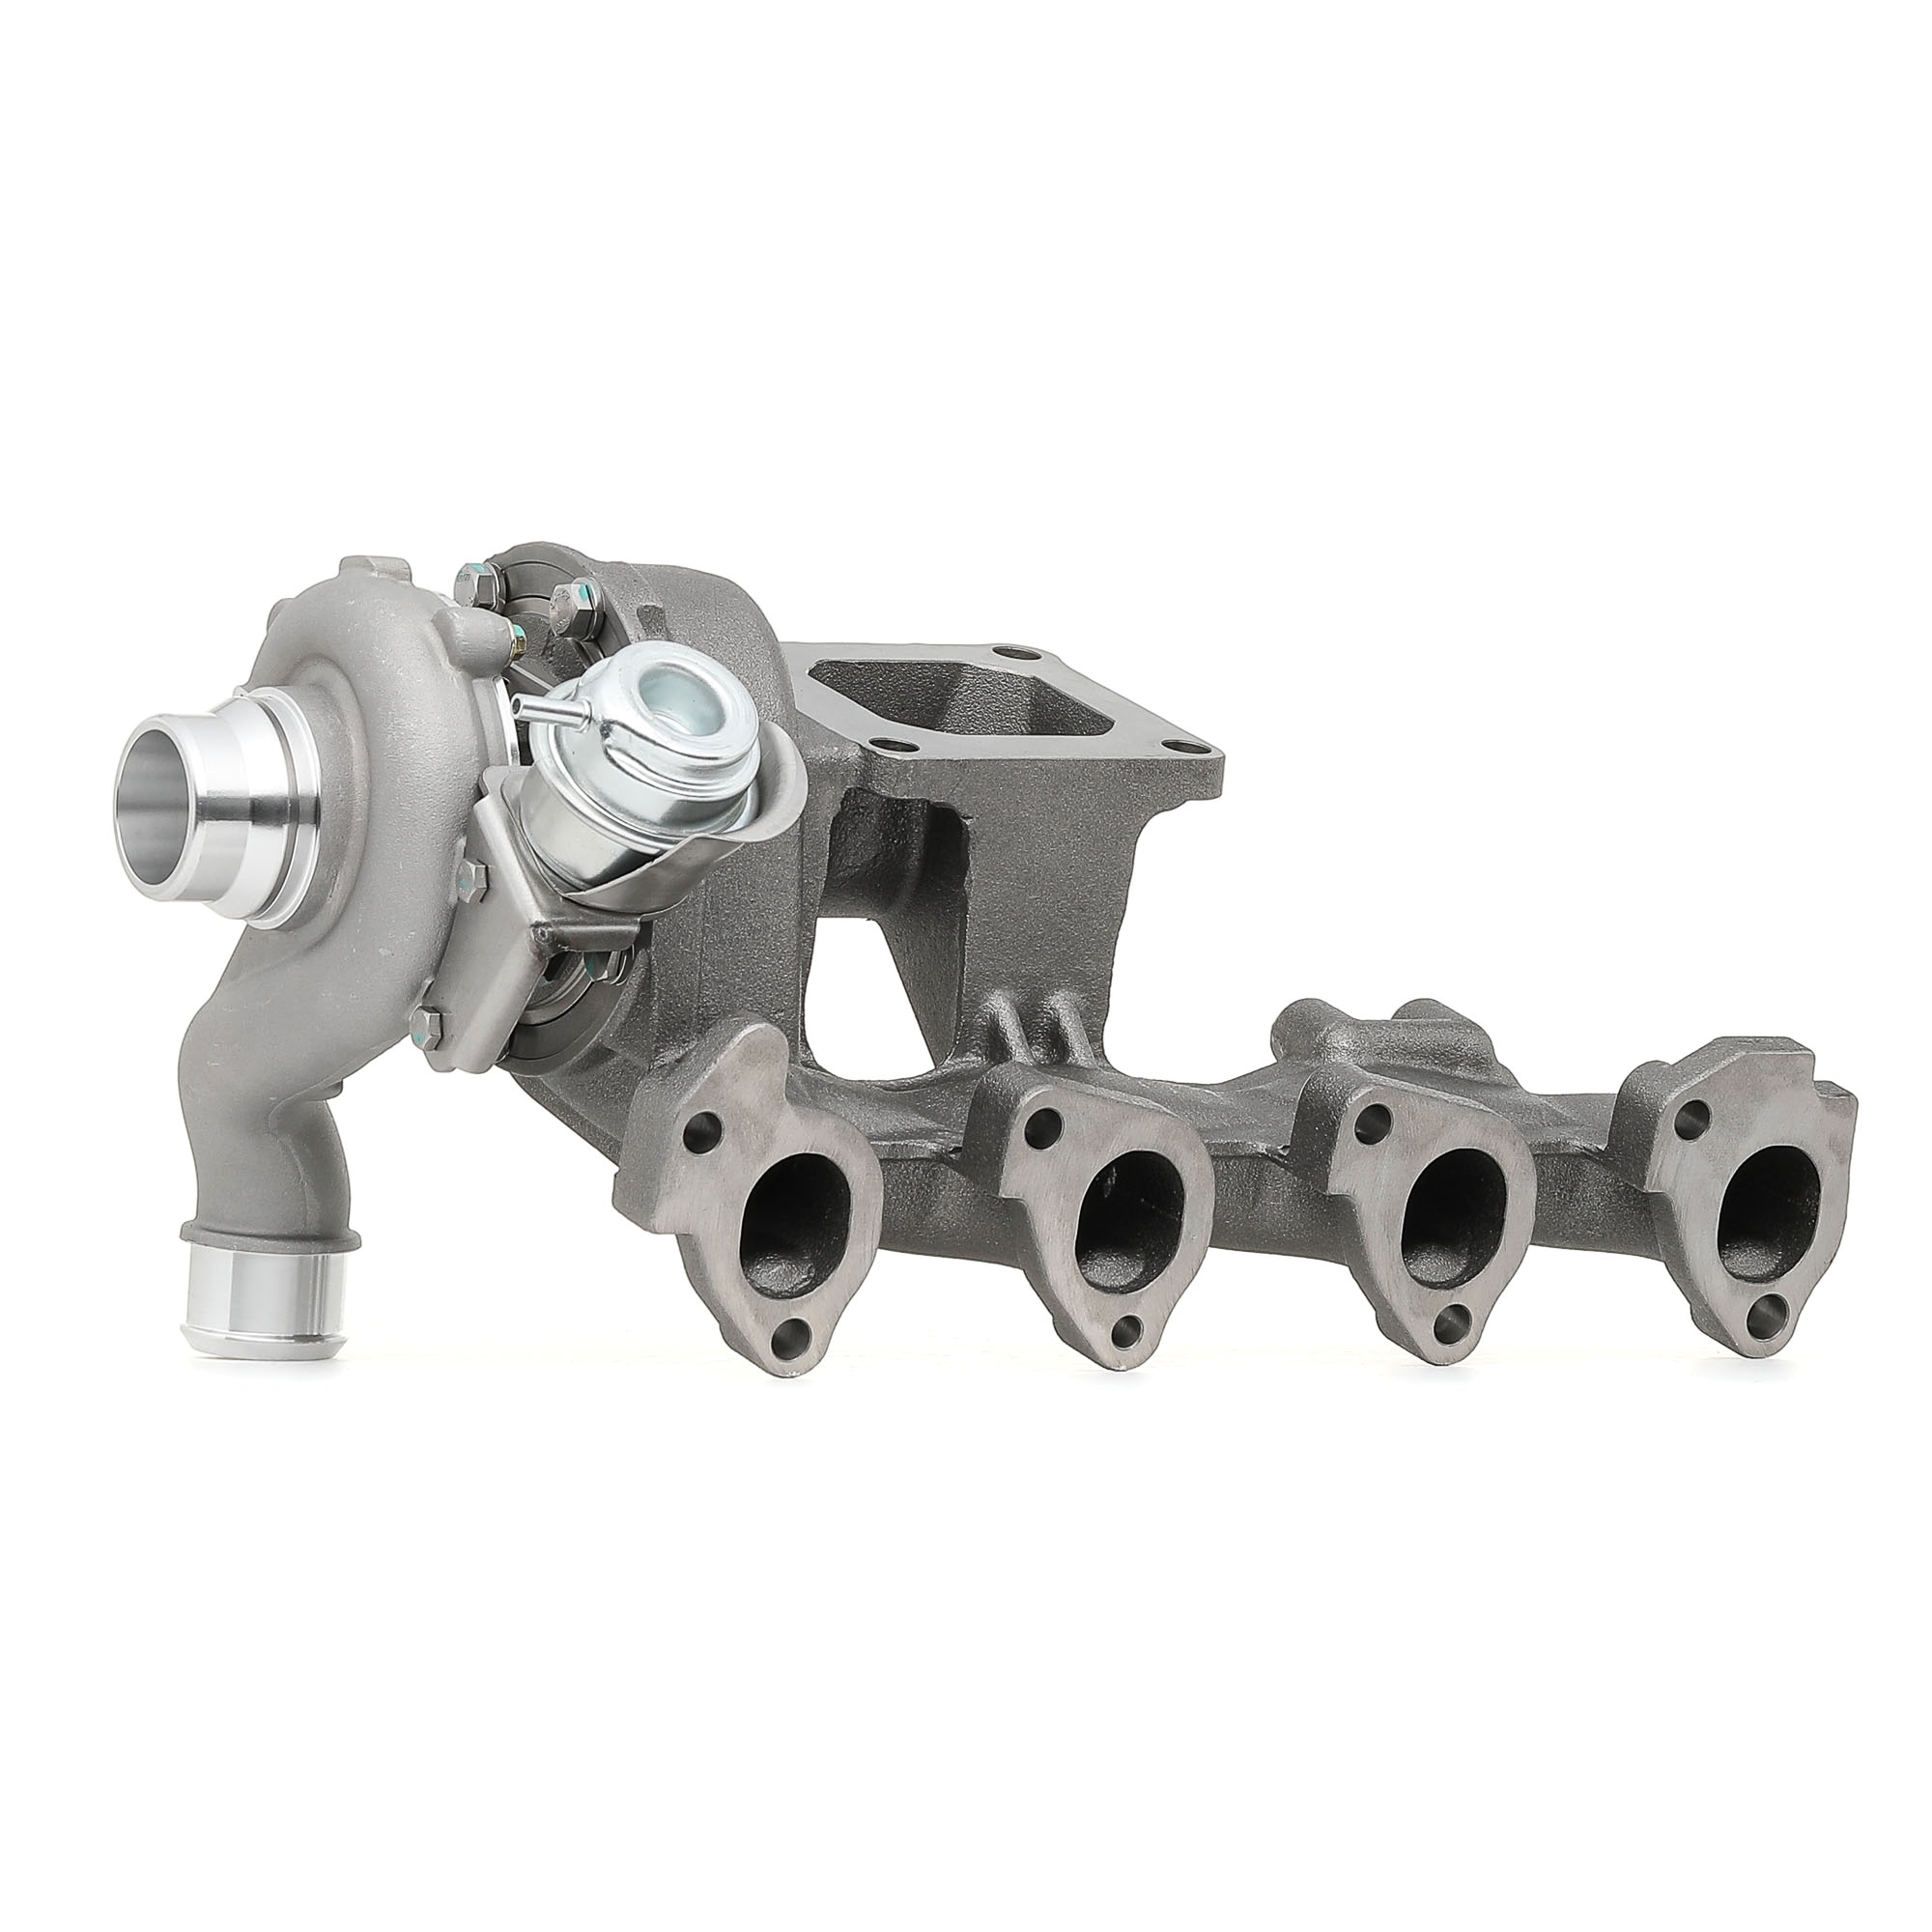 STARK SKCT-1190297 Turbocharger Exhaust Turbocharger, Vacuum-controlled, without gaskets/seals